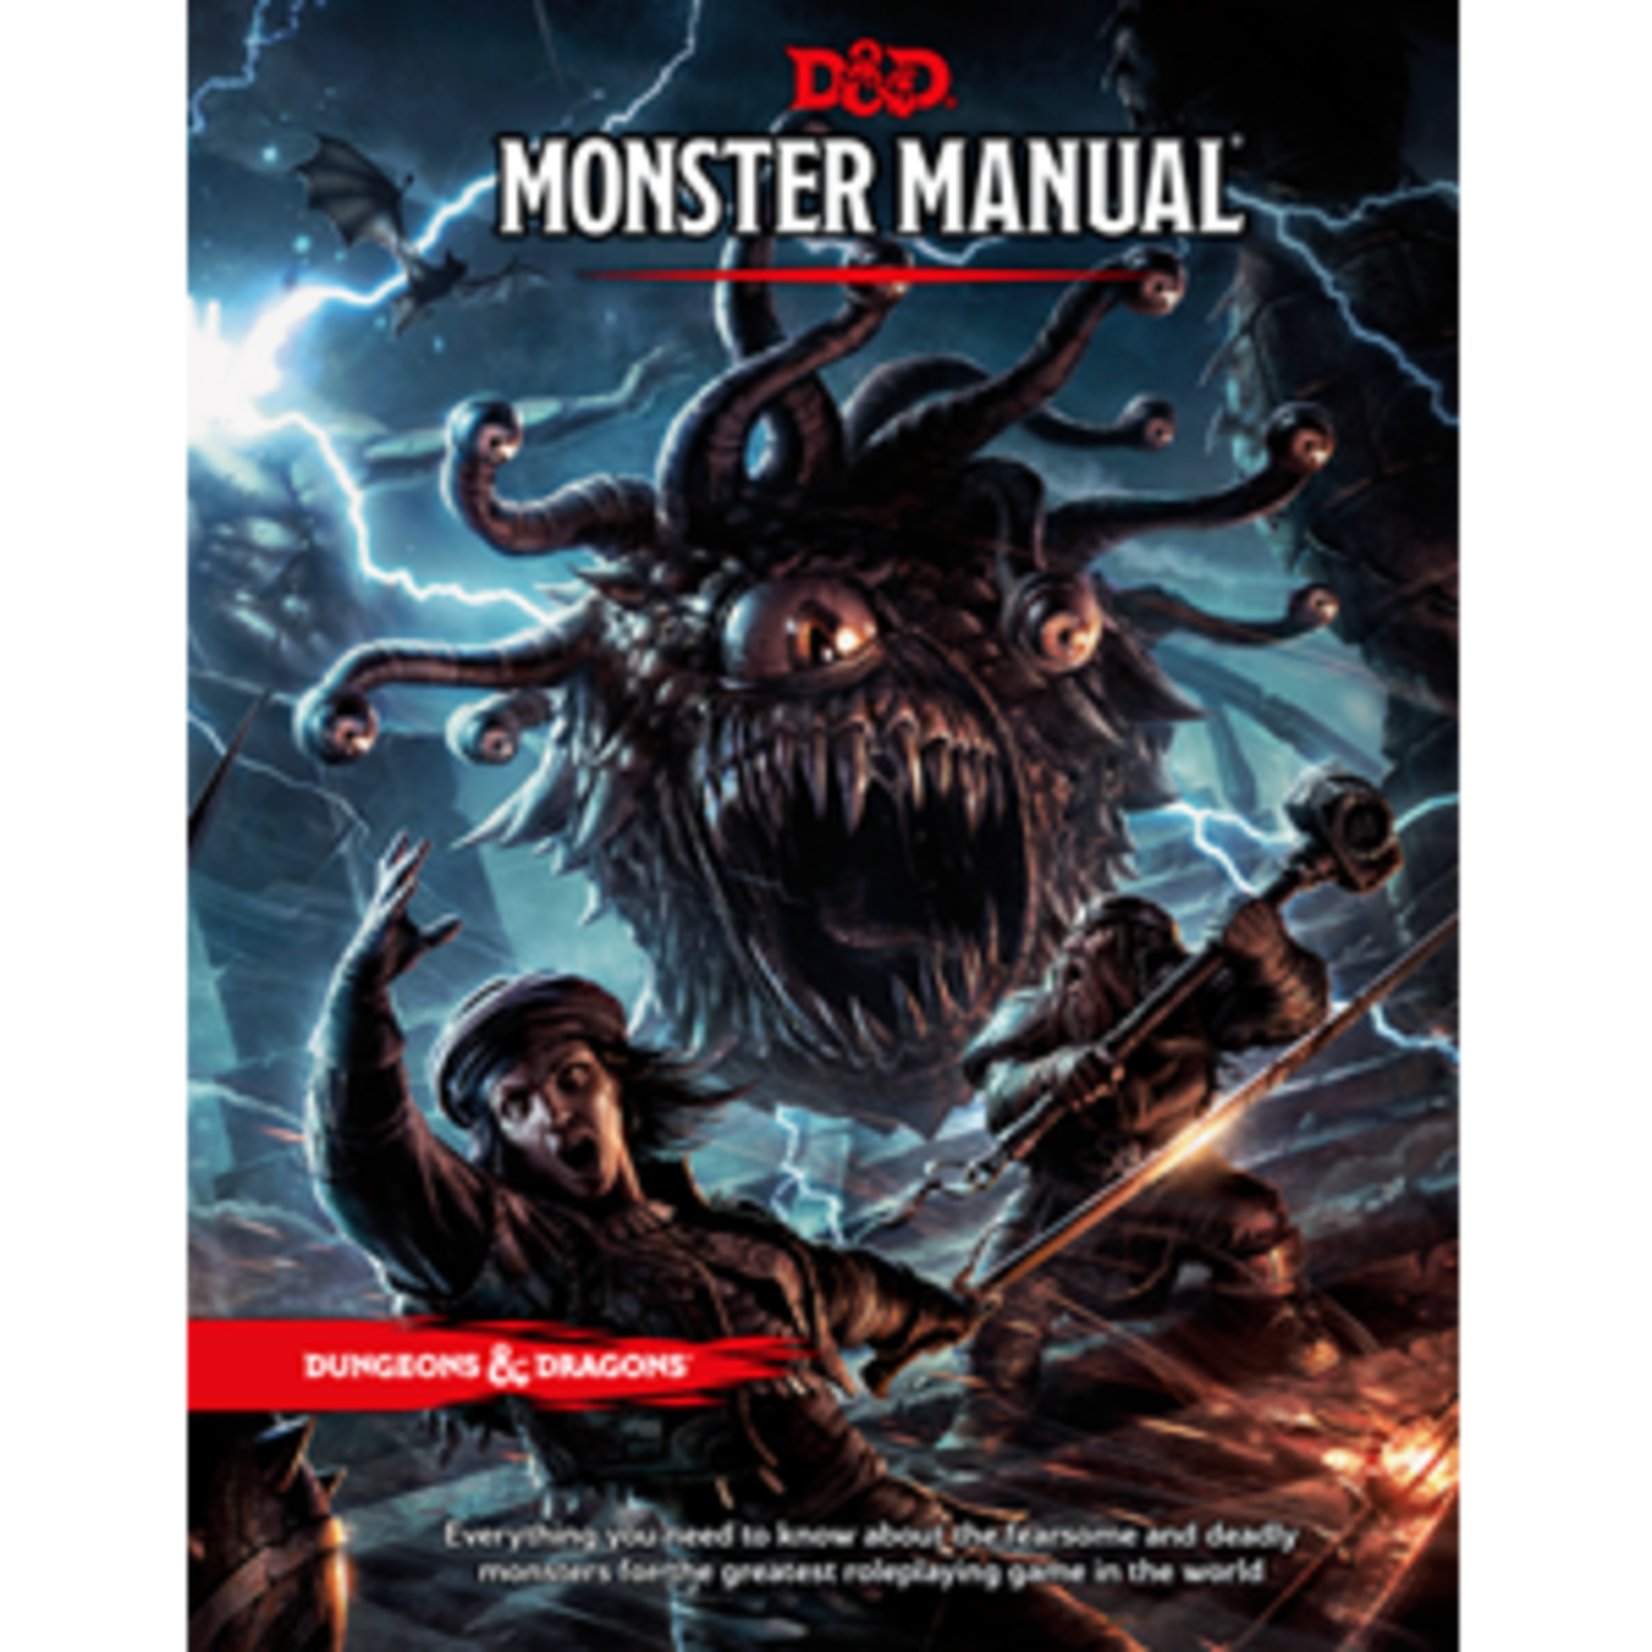 Dungeons & Dragons Dungeons & Dragons – Monster Manual (5th Edition)